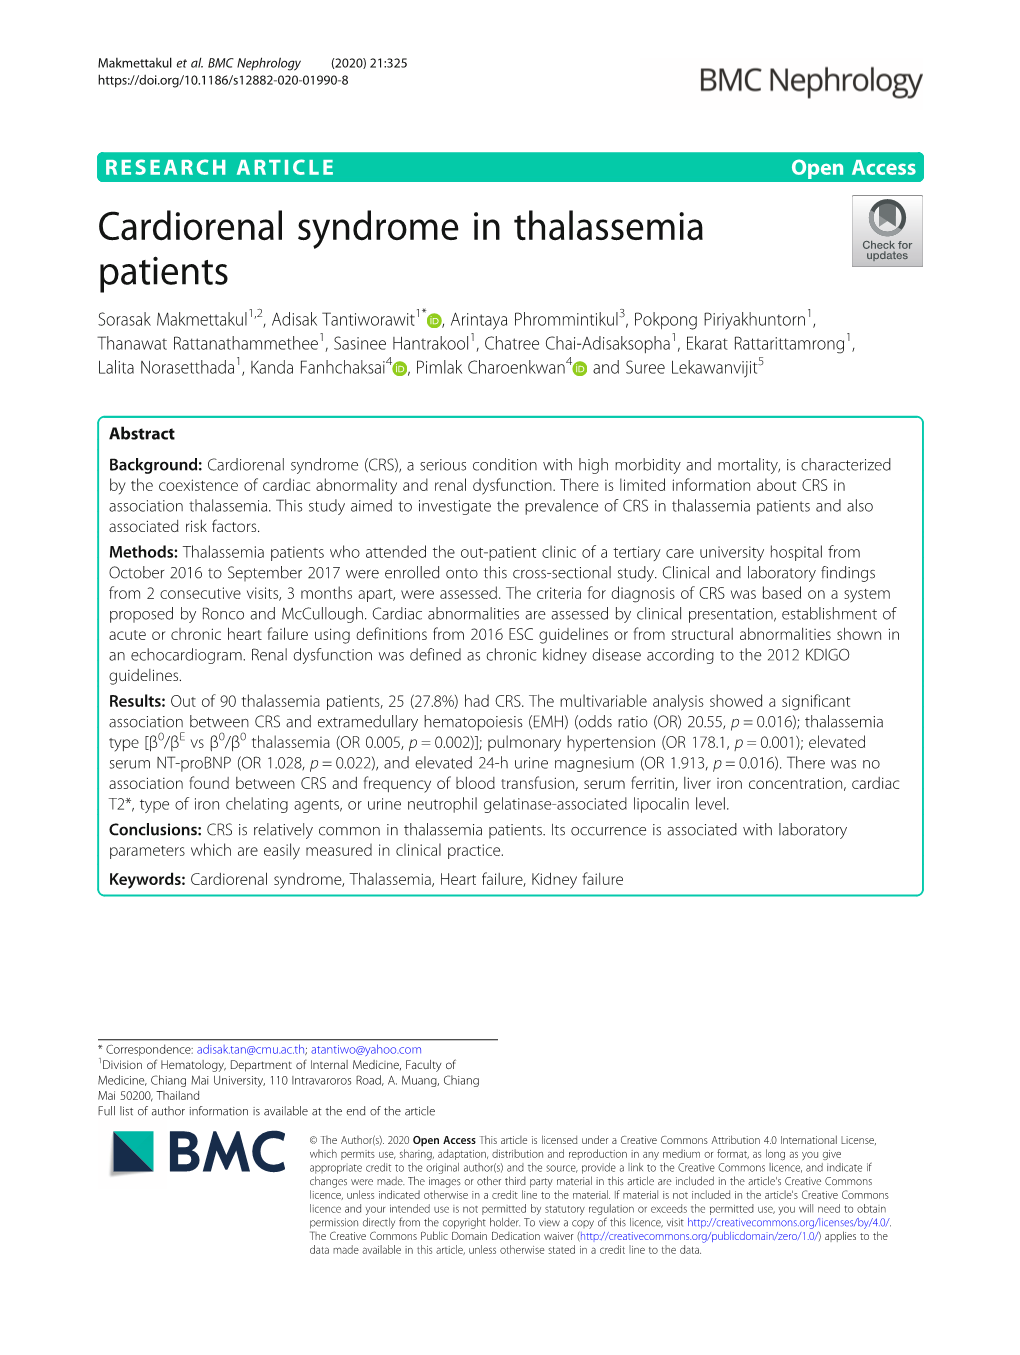 Cardiorenal Syndrome in Thalassemia Patients